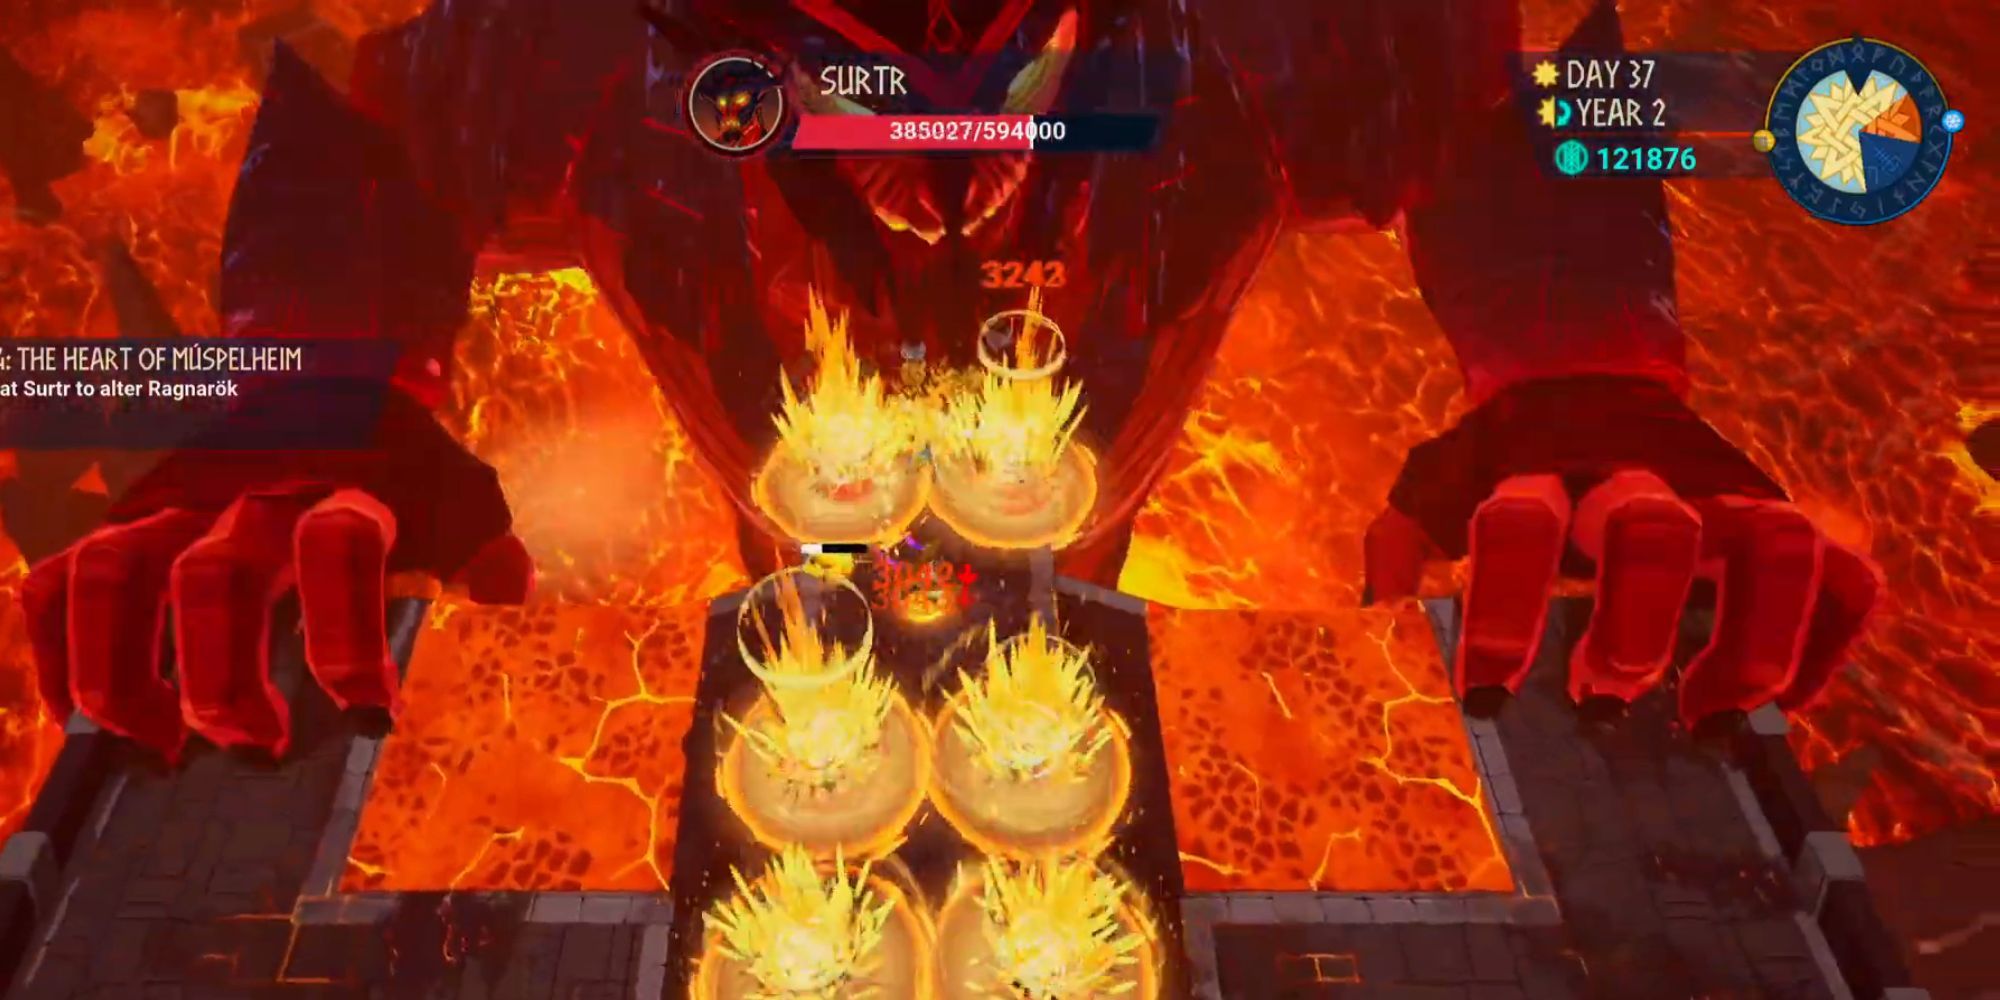 Surtr summons fire circles surrounding player in the center